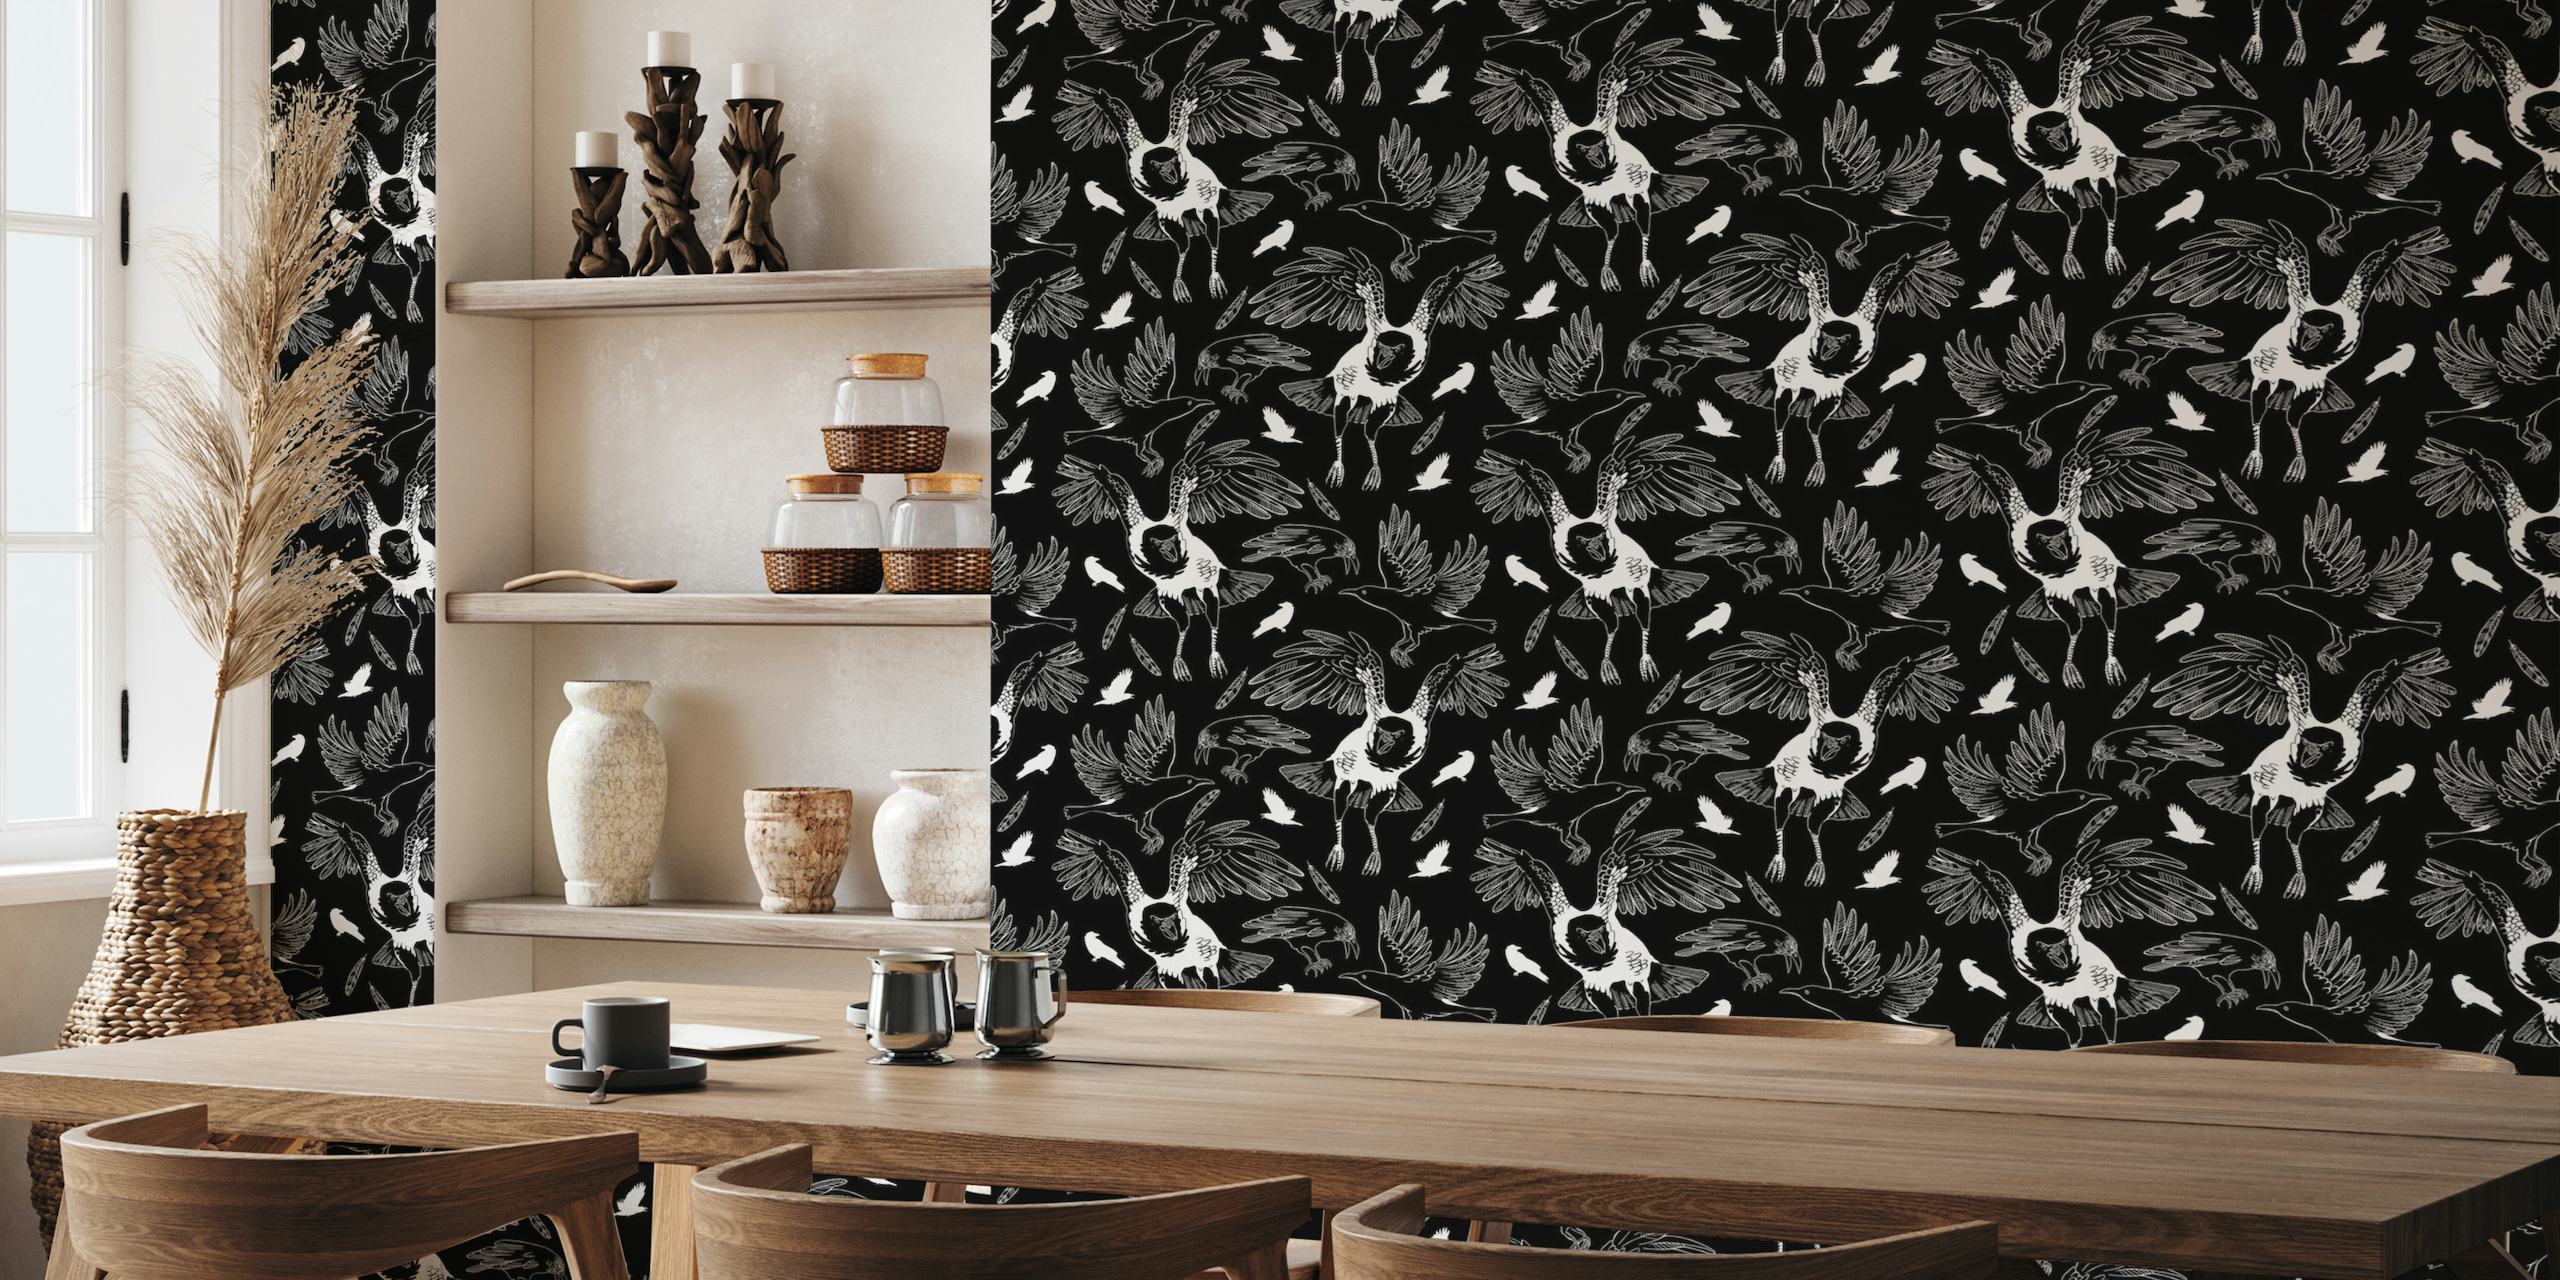 A wall mural featuring an illustration of crows and ravens in black and white.